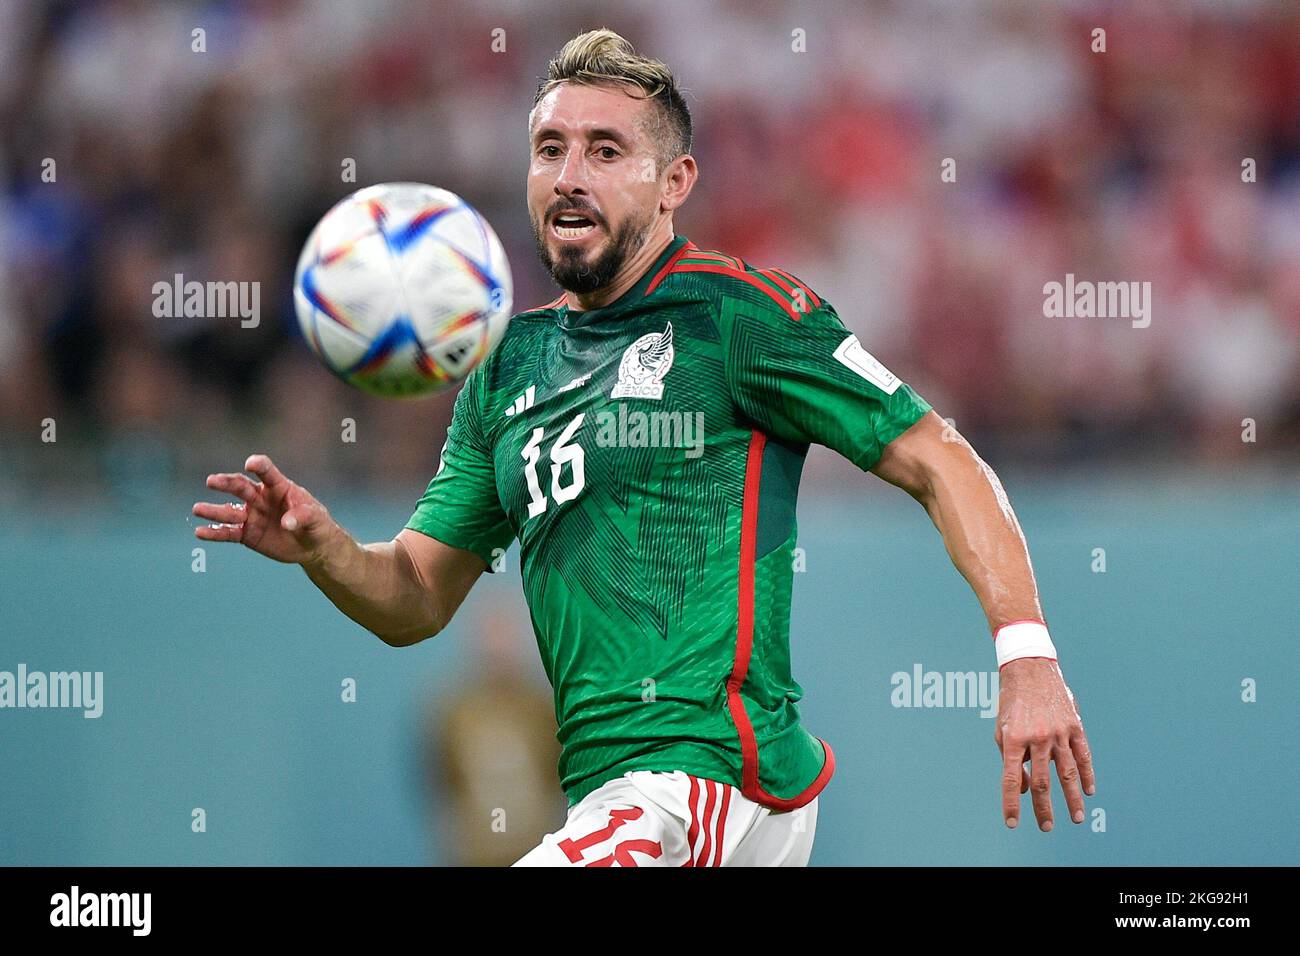 DOHA, QATAR - NOVEMBER 22: Hector Herrera of Mexico controlls the ball during the Group C - FIFA World Cup Qatar 2022 match between Mexico and Poland at Stadium 974 on November 22, 2022 in Doha, Qatar (Photo by Pablo Morano/BSR Agency) Credit: BSR Agency/Alamy Live News Credit: BSR Agency/Alamy Live News Stock Photo